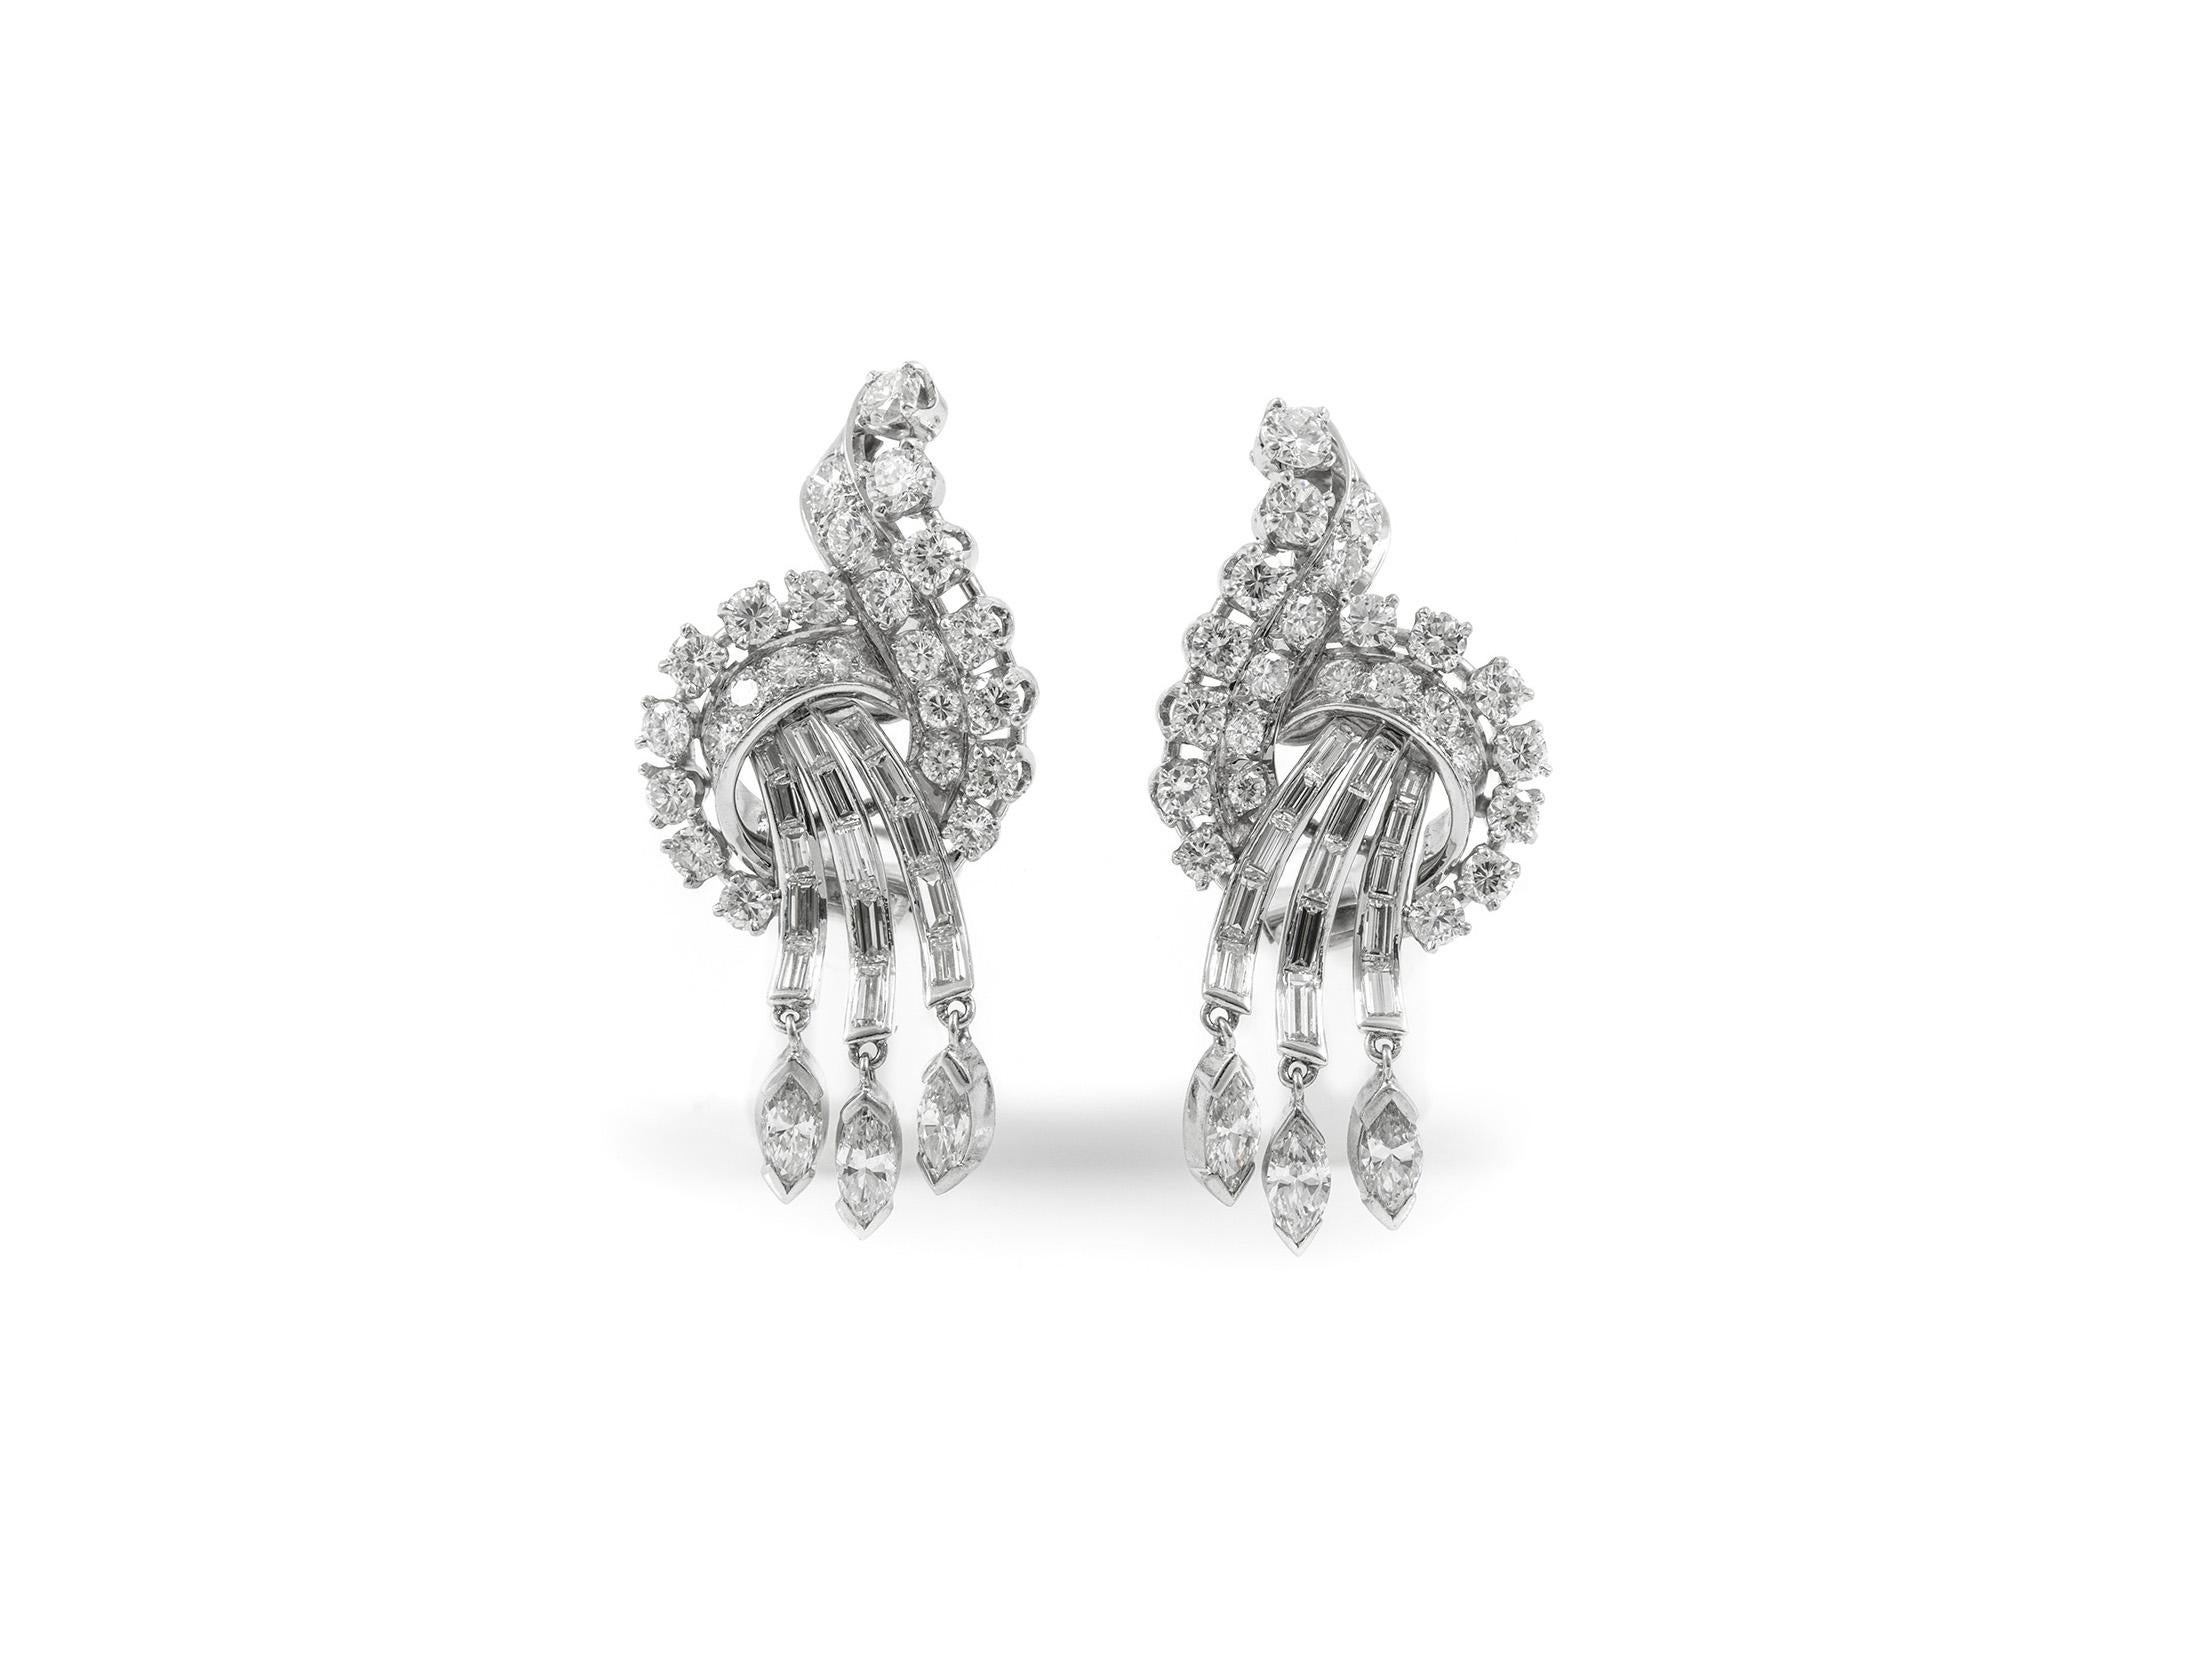 The earrings are finely crafted in platinum with round-, marquise-, and baguette-cut diamonds weighing a total of approximately 6.00 carats.